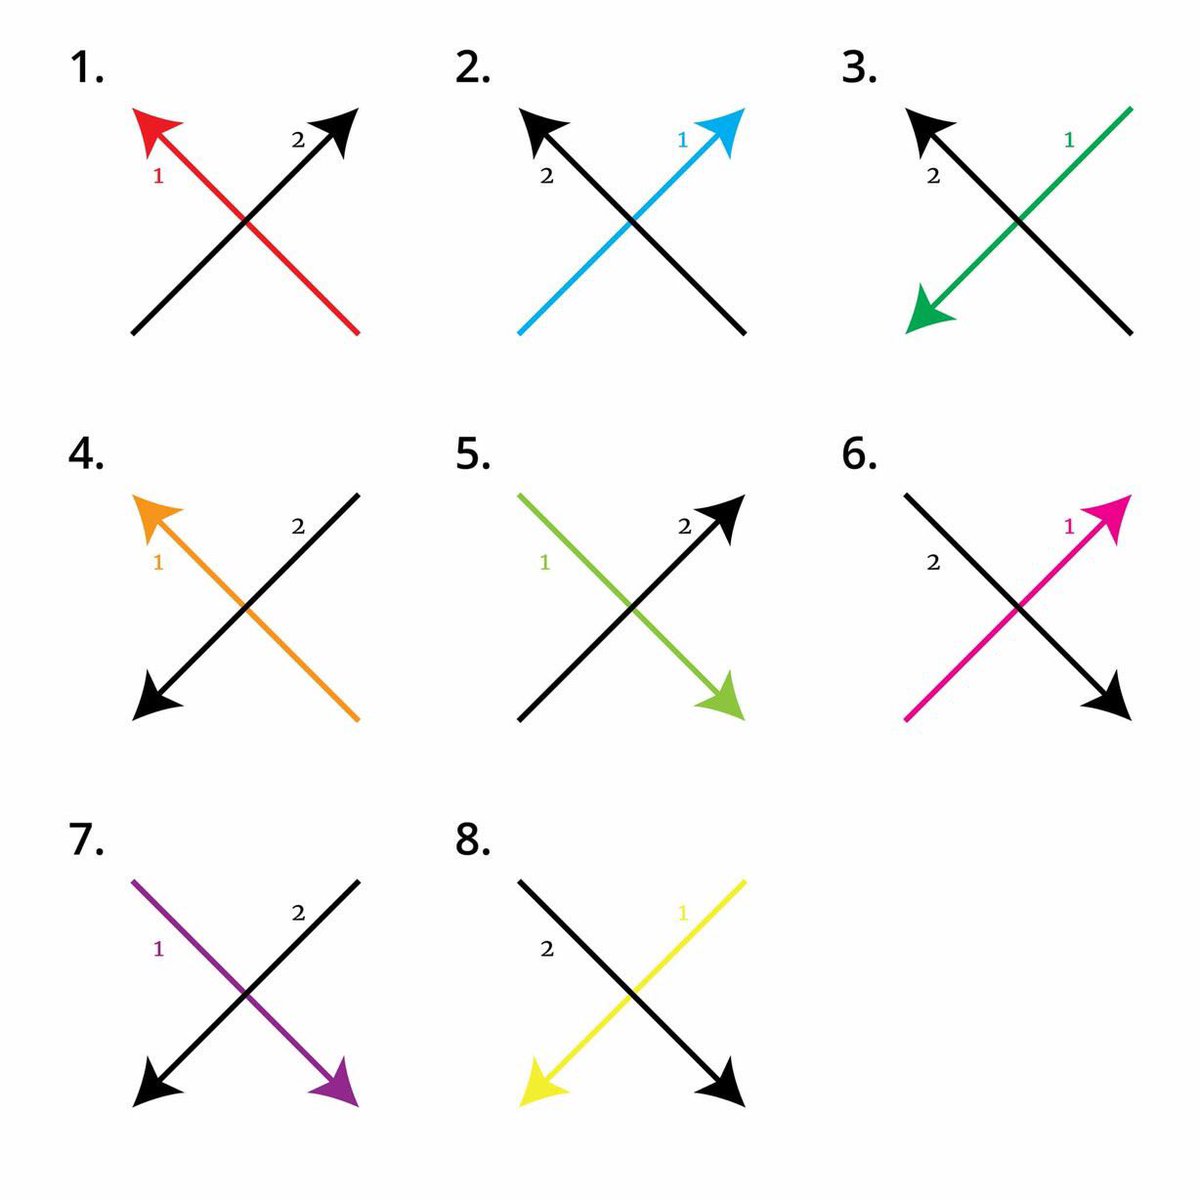 RT @ComedyGee: This is so interesting - which way do you draw an X? 

Coloured line being the first stroke https://t.co/rEpgK7s7mr